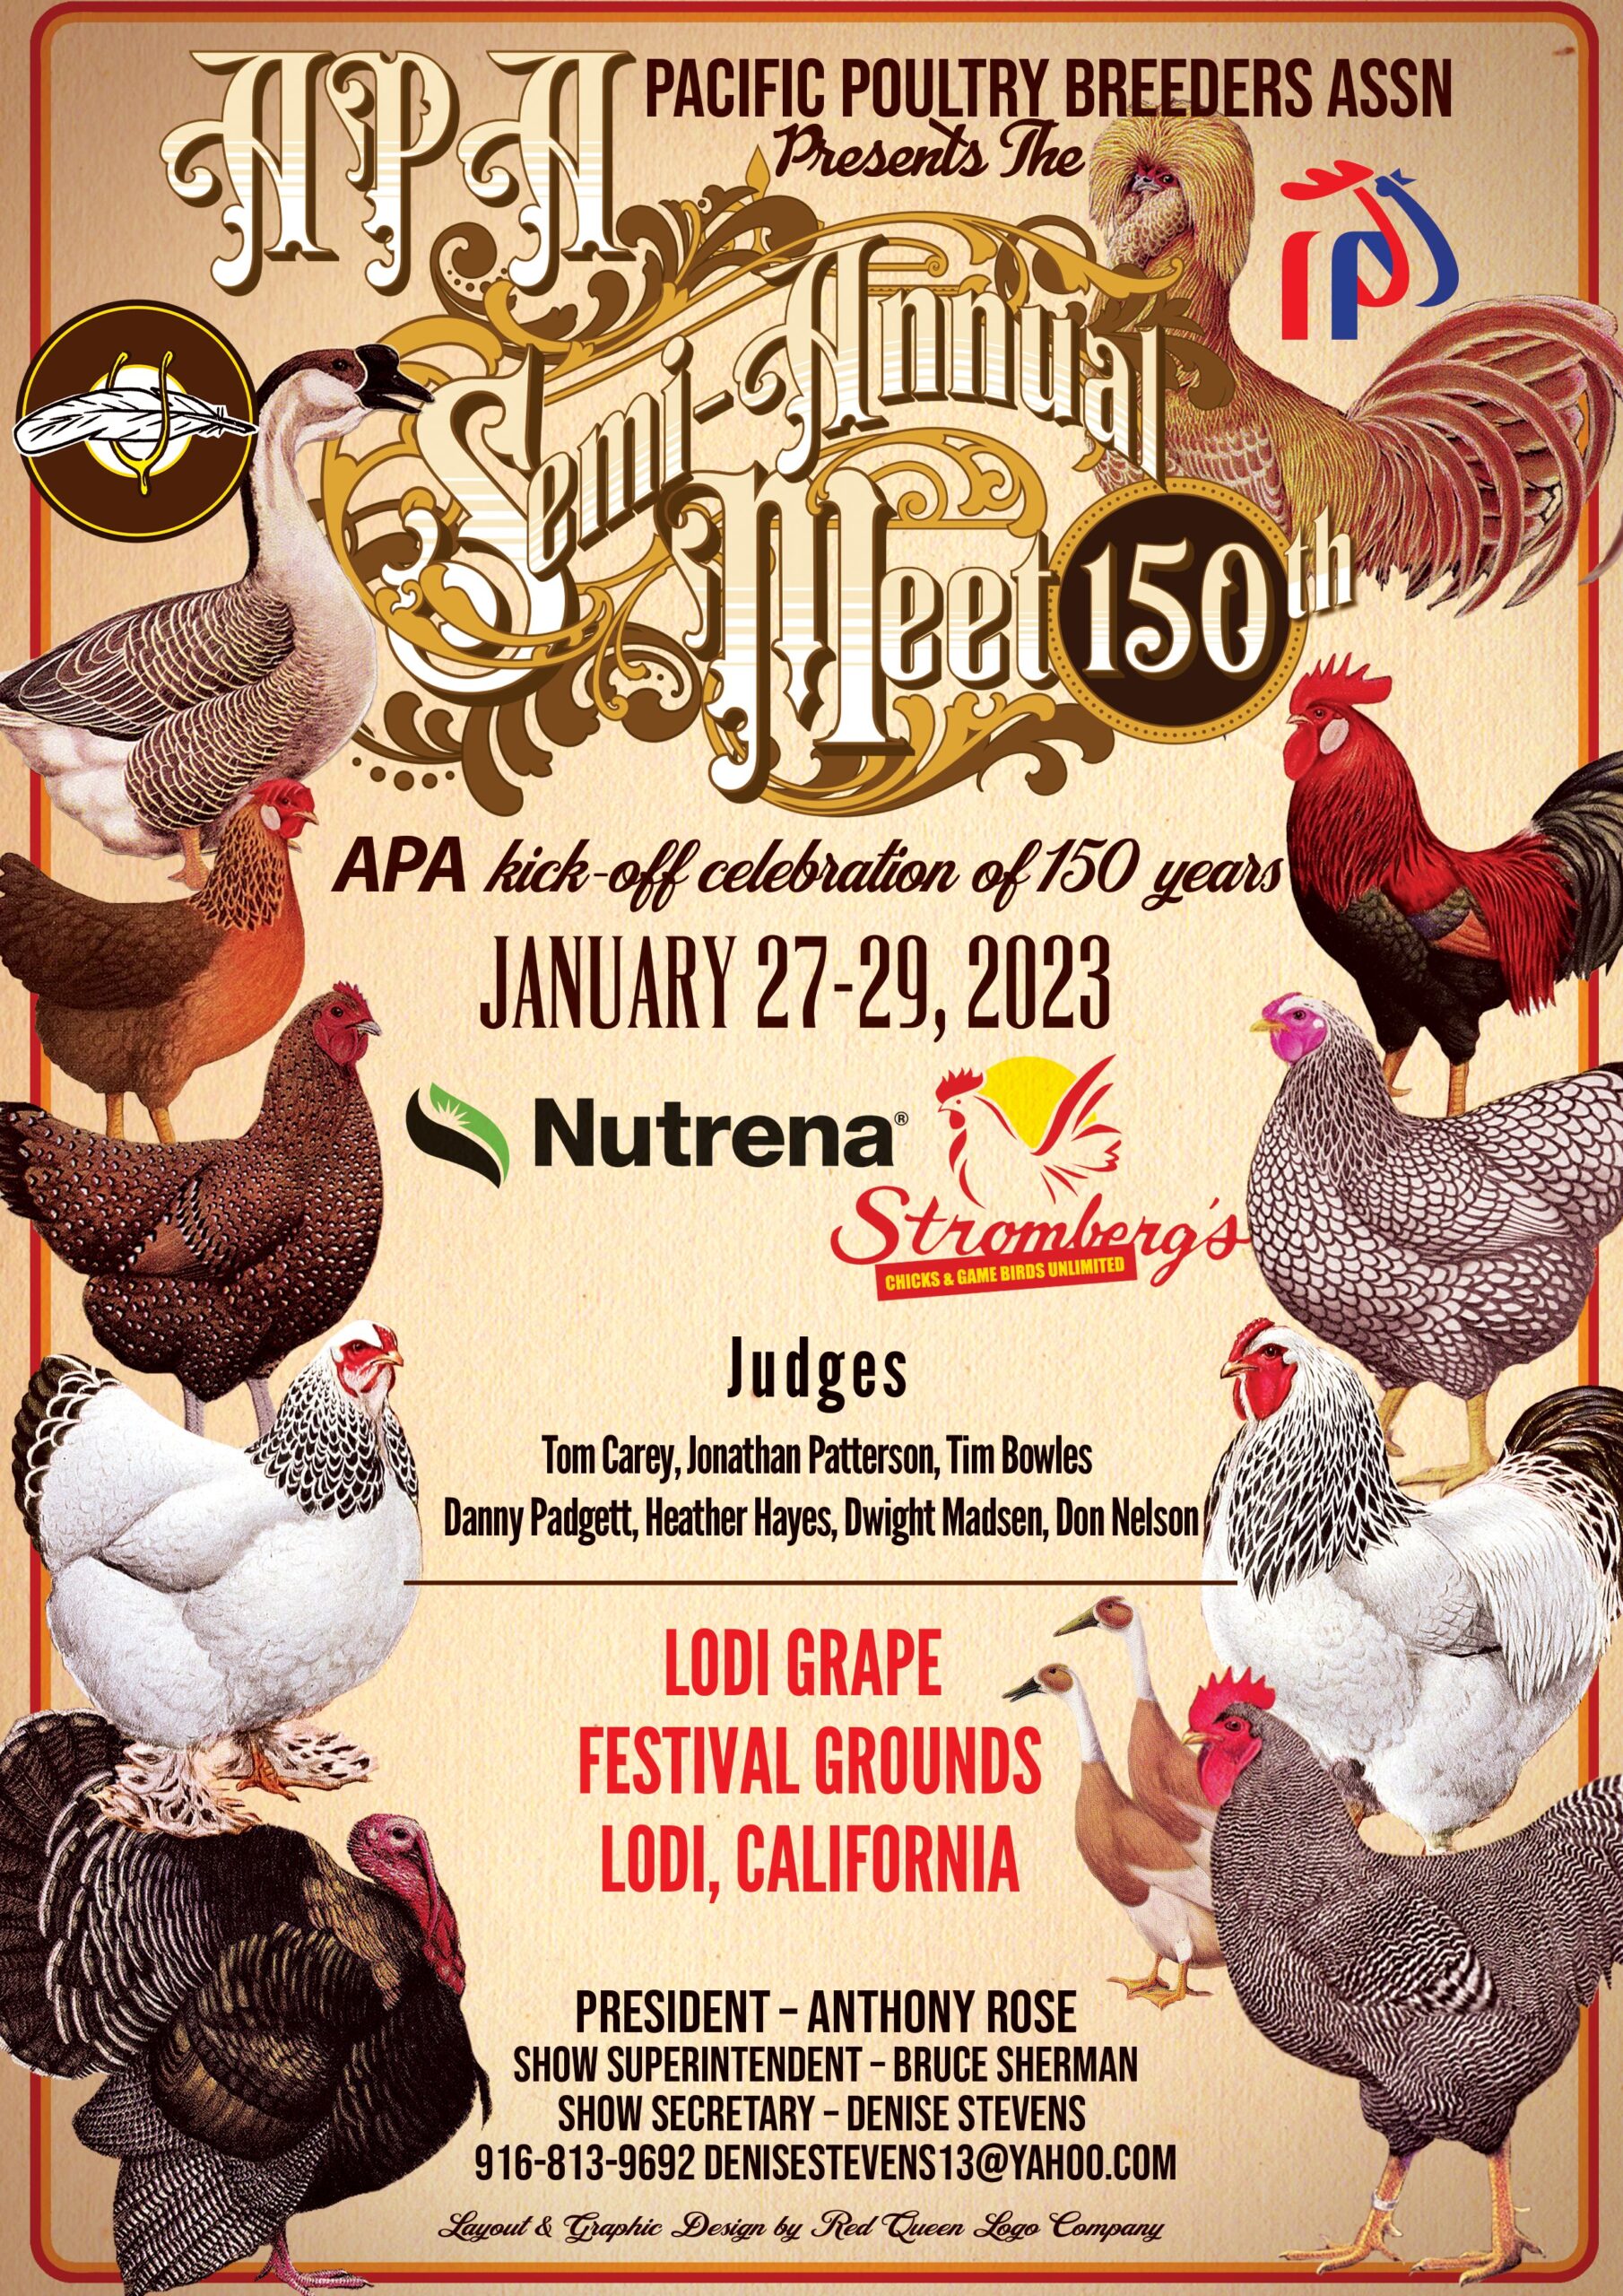 2023 APA 150th Anniversary SemiAnnual Meet American Poultry Association